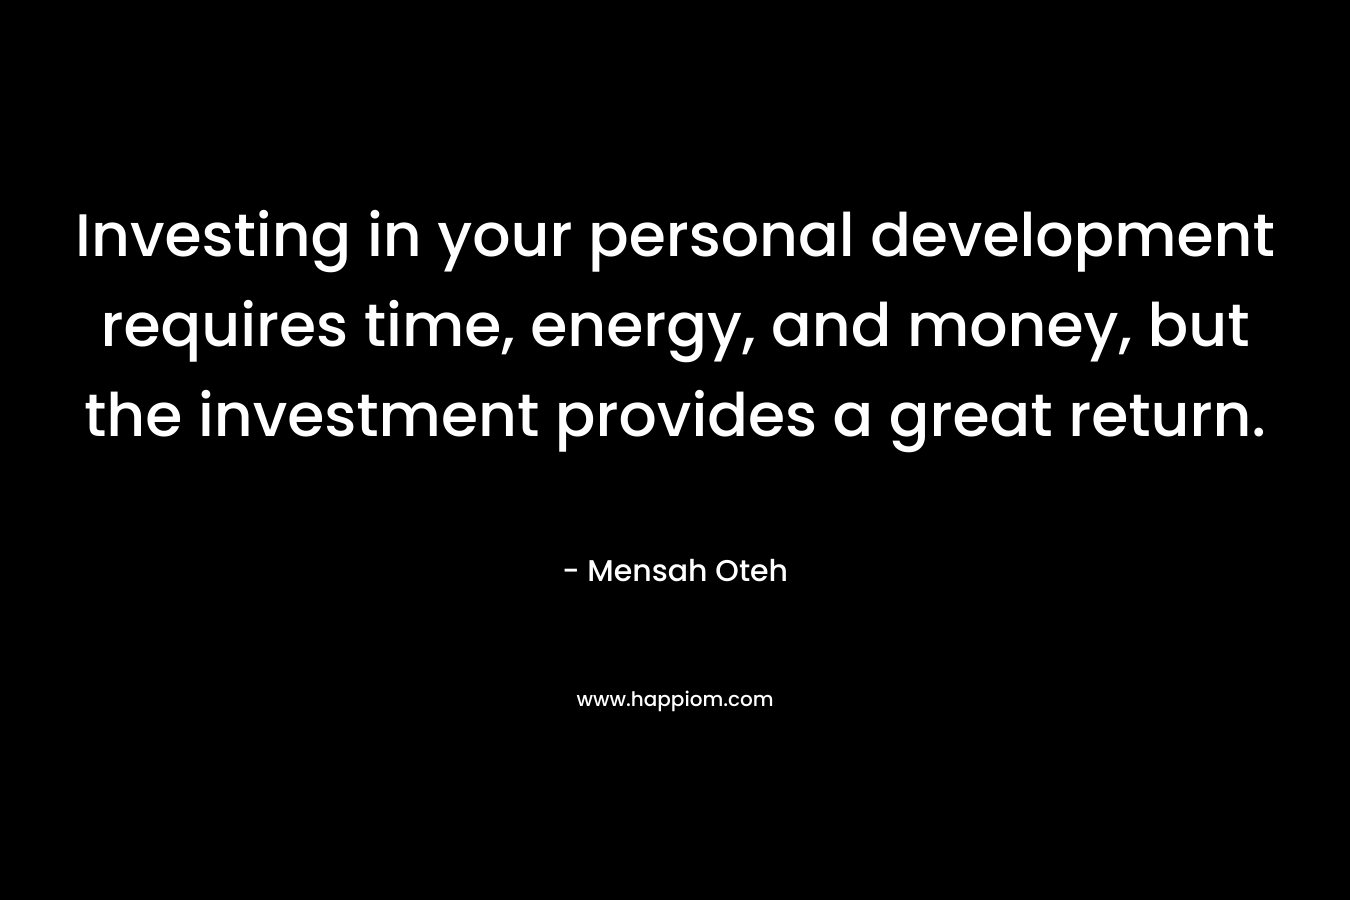 Investing in your personal development requires time, energy, and money, but the investment provides a great return.